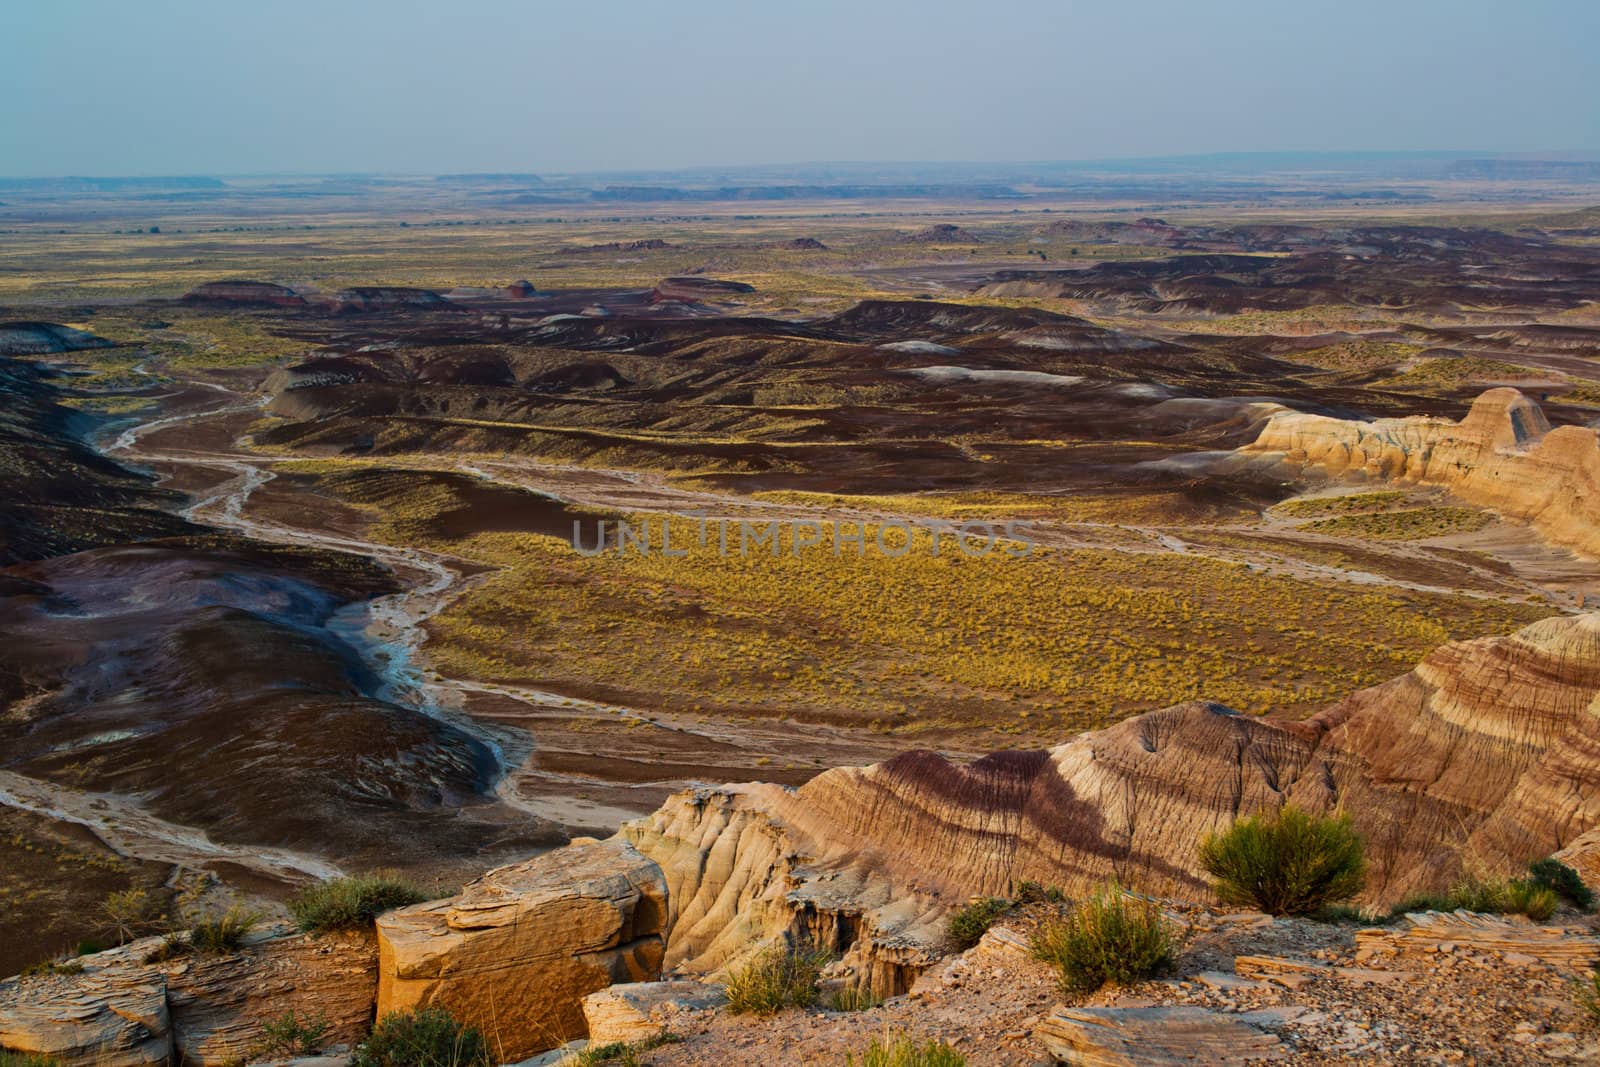 The beautiful combination of colors of the yellow flowers against the sand and rock formation of the valley floor just before sunset made for a peaceful scene.